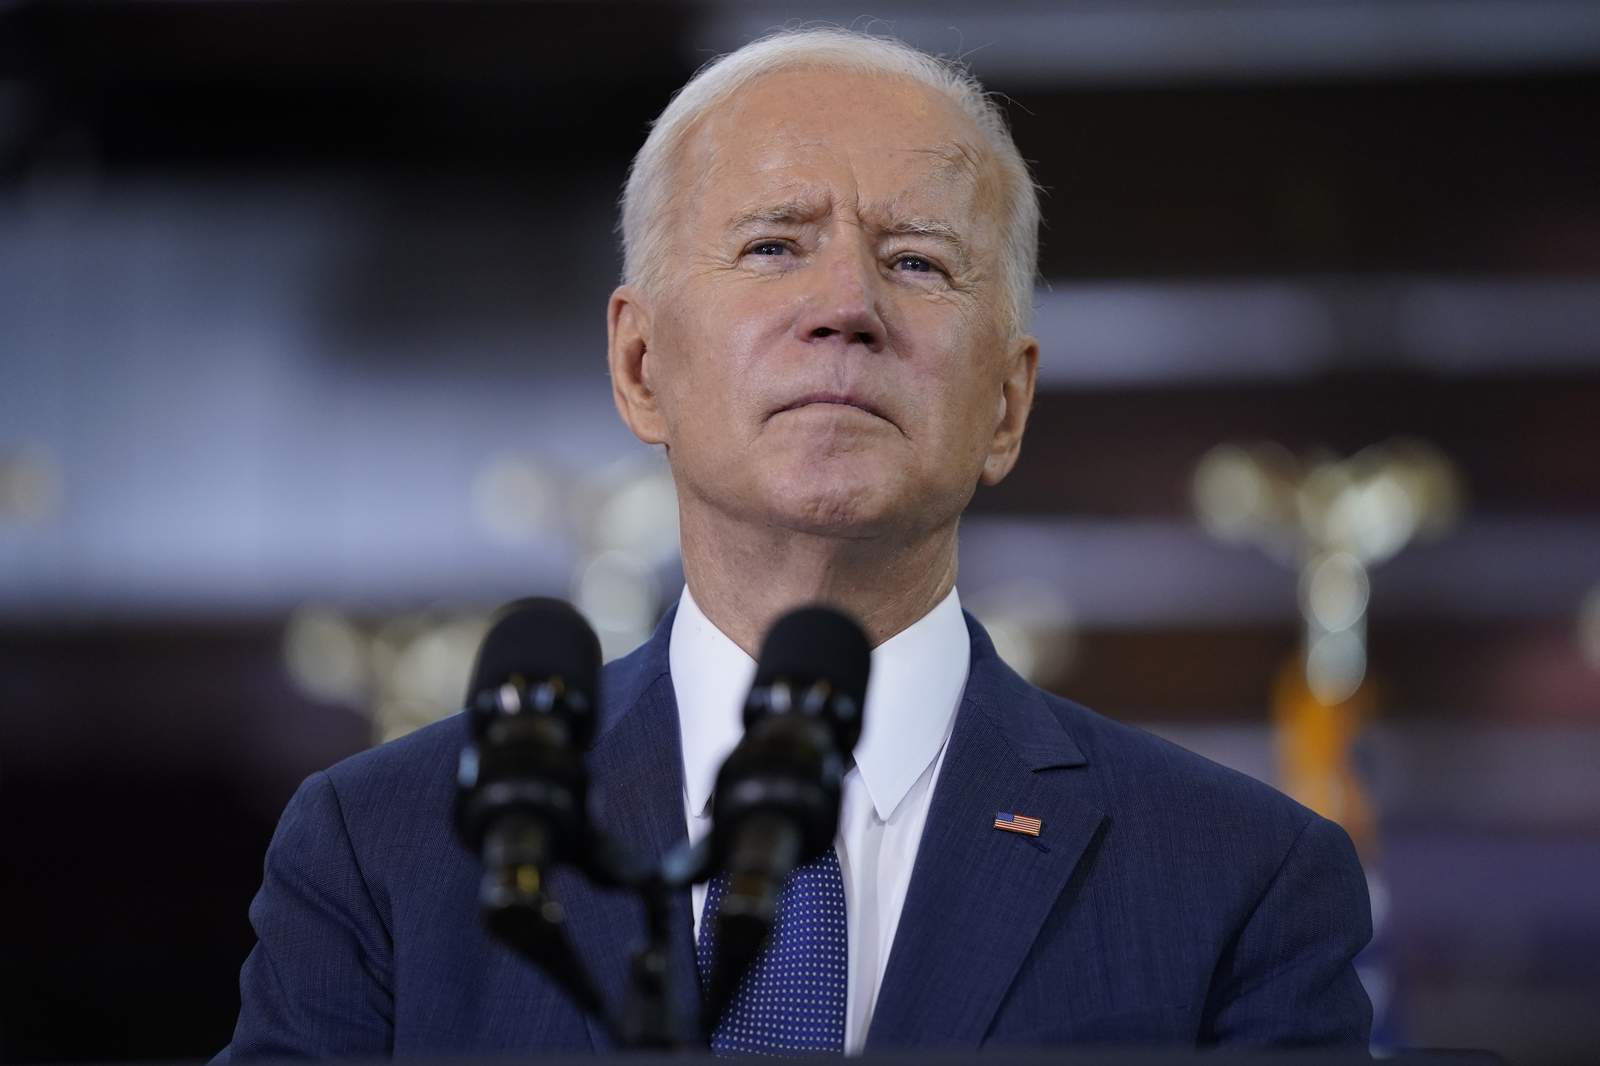 Biden says Rangers making mistake by allowing full capacity